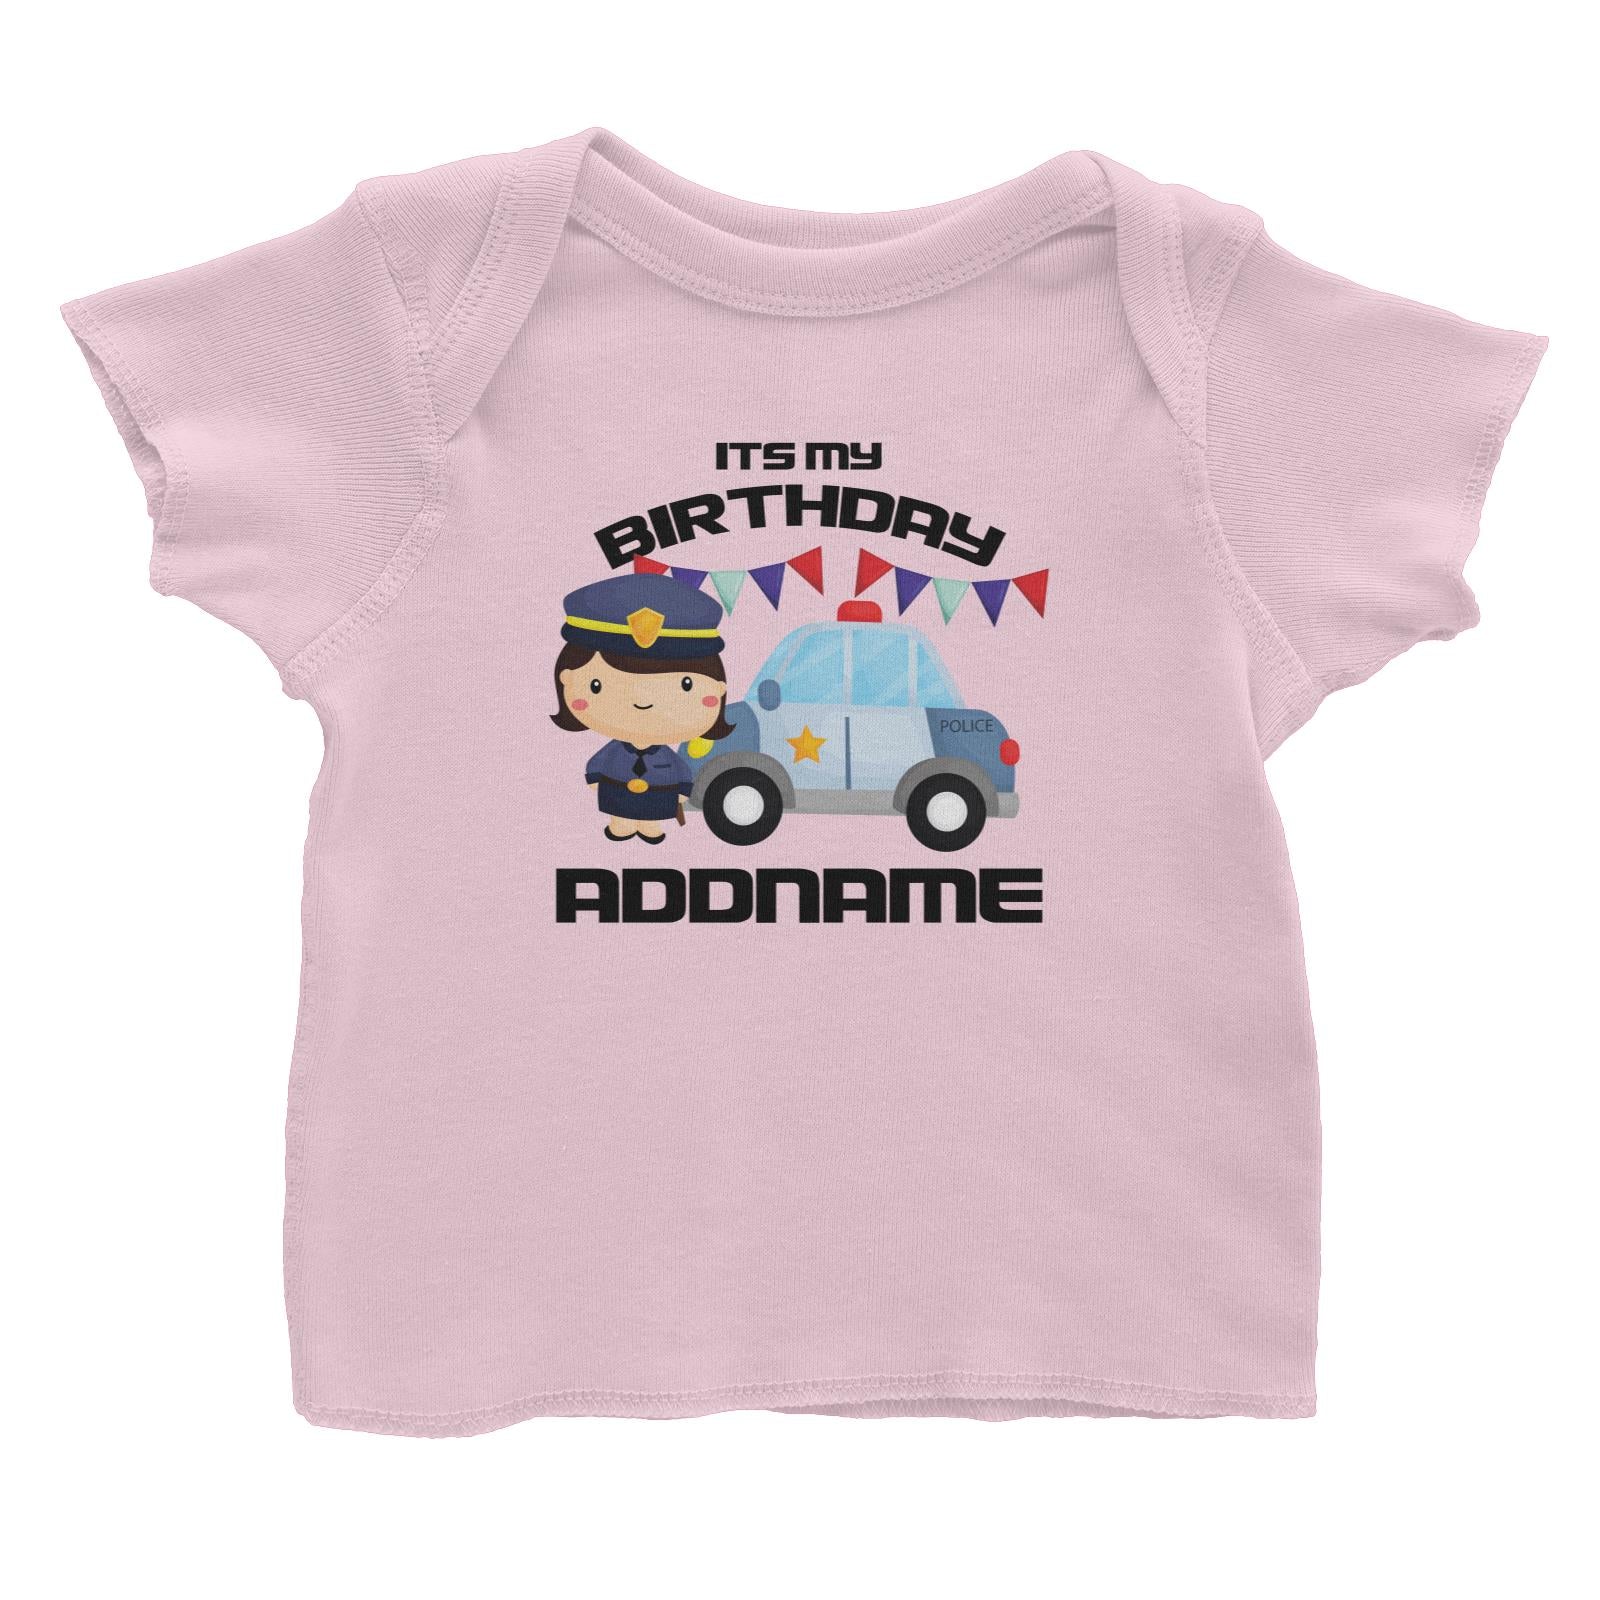 Birthday Police Officer Girl In Suit With Police Car Its My Birthday Addname Baby T-Shirt